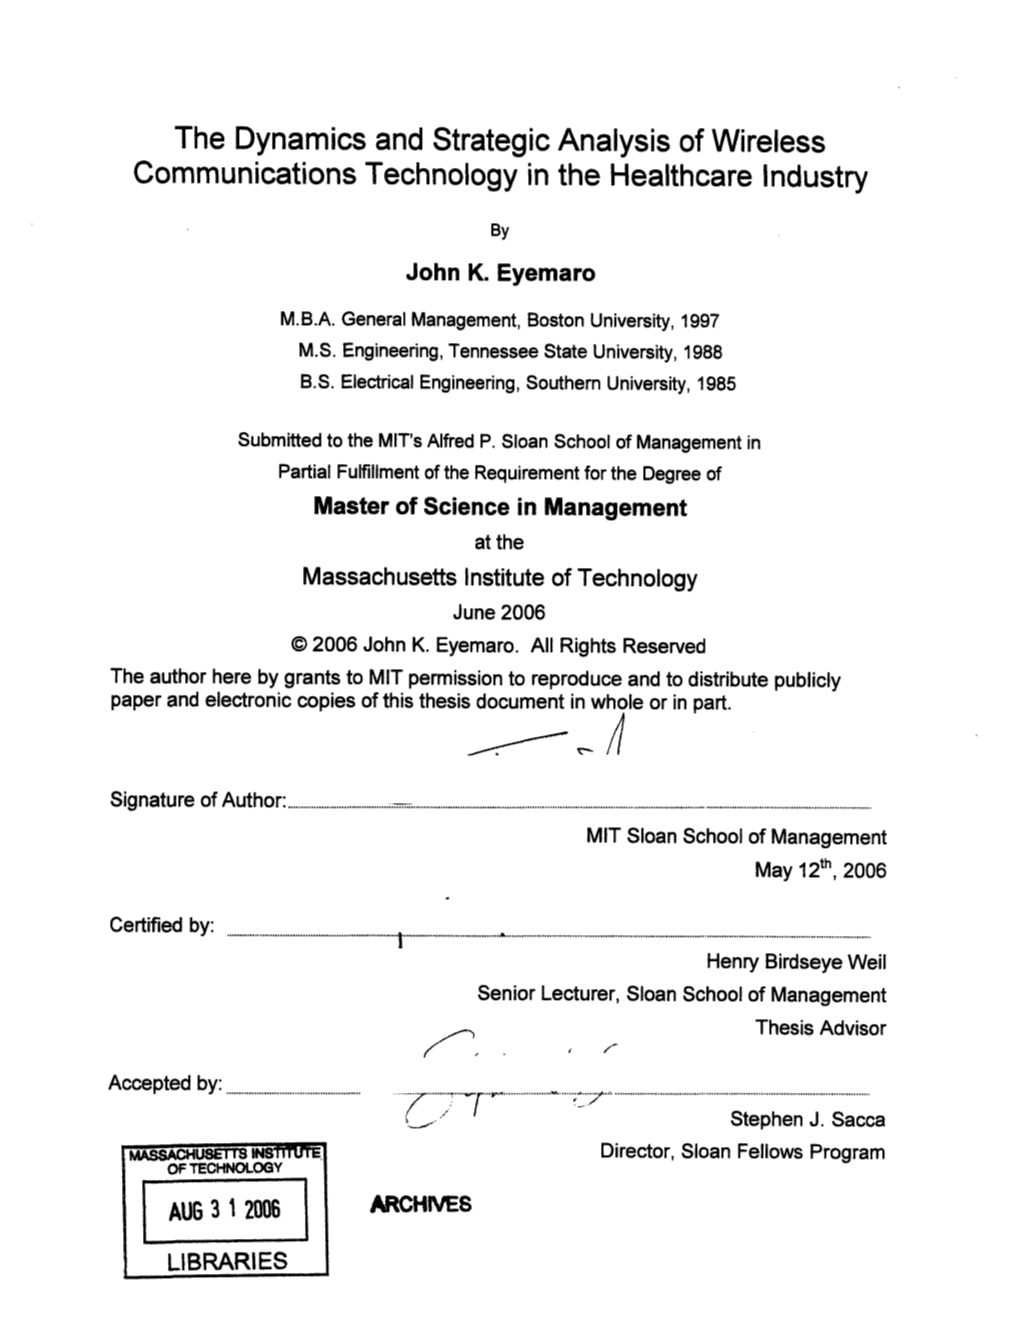 The Dynamics and Strategic Analysis of Wireless Communications Technology in the Healthcare Industry